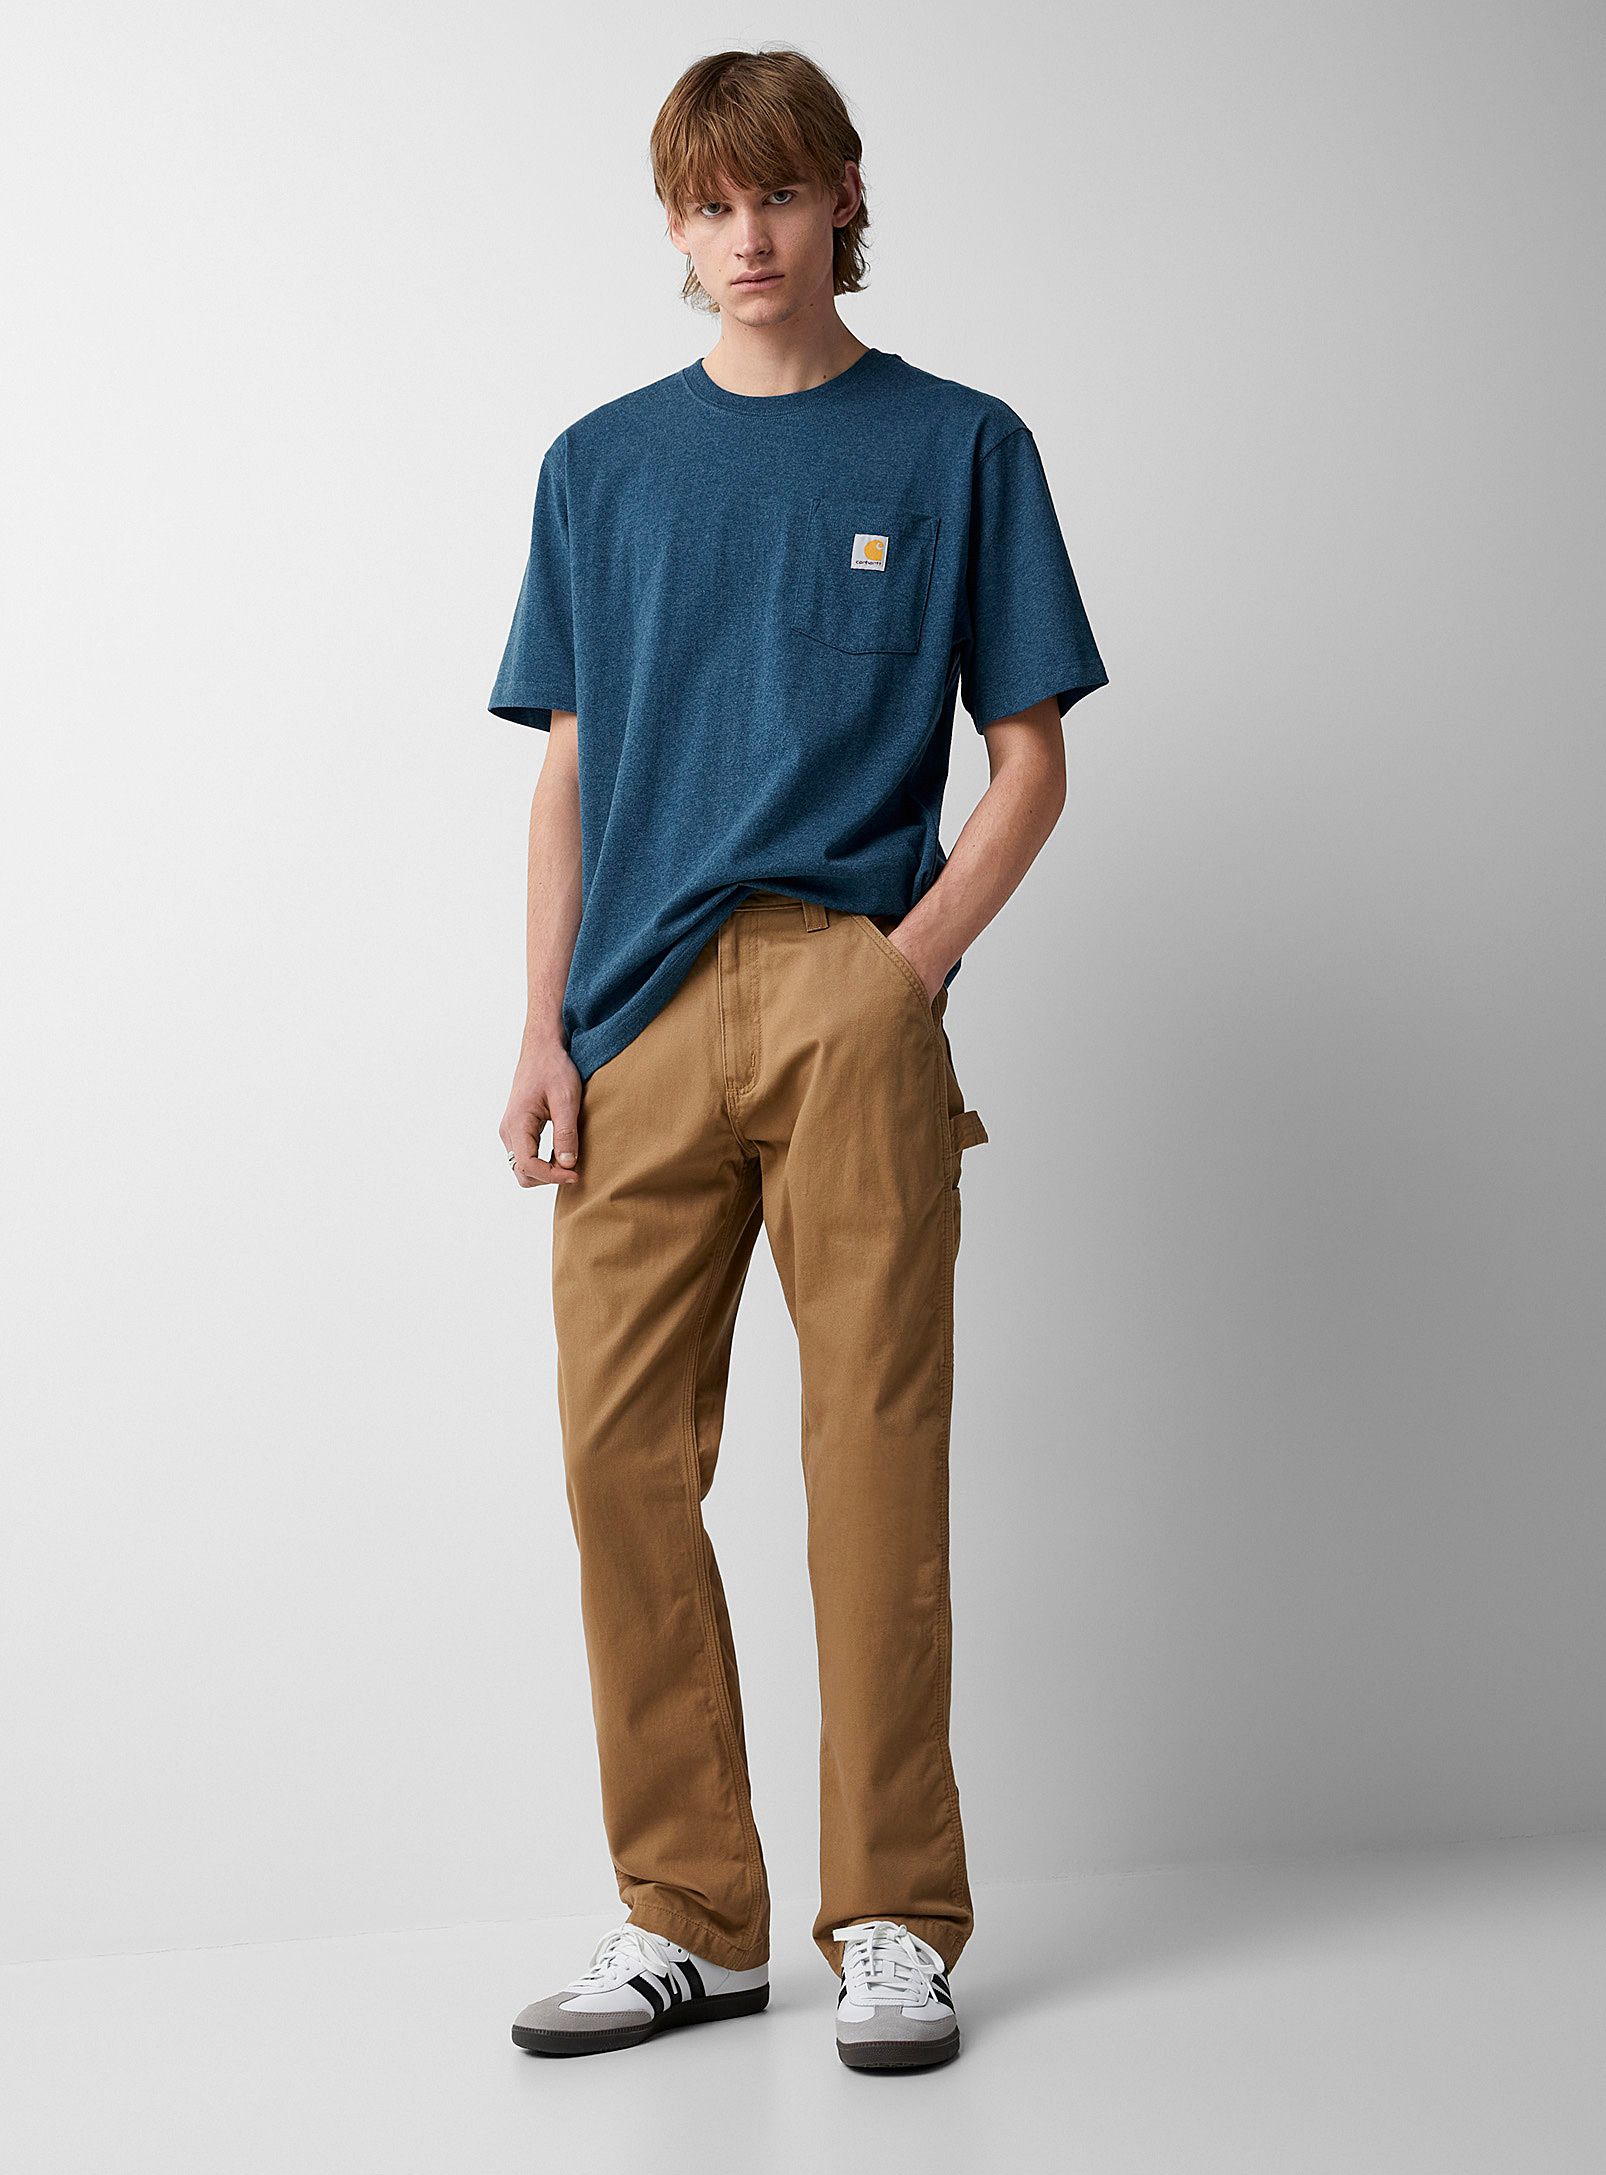 Carhartt - Men's Twill utility work pant Relaxed fit